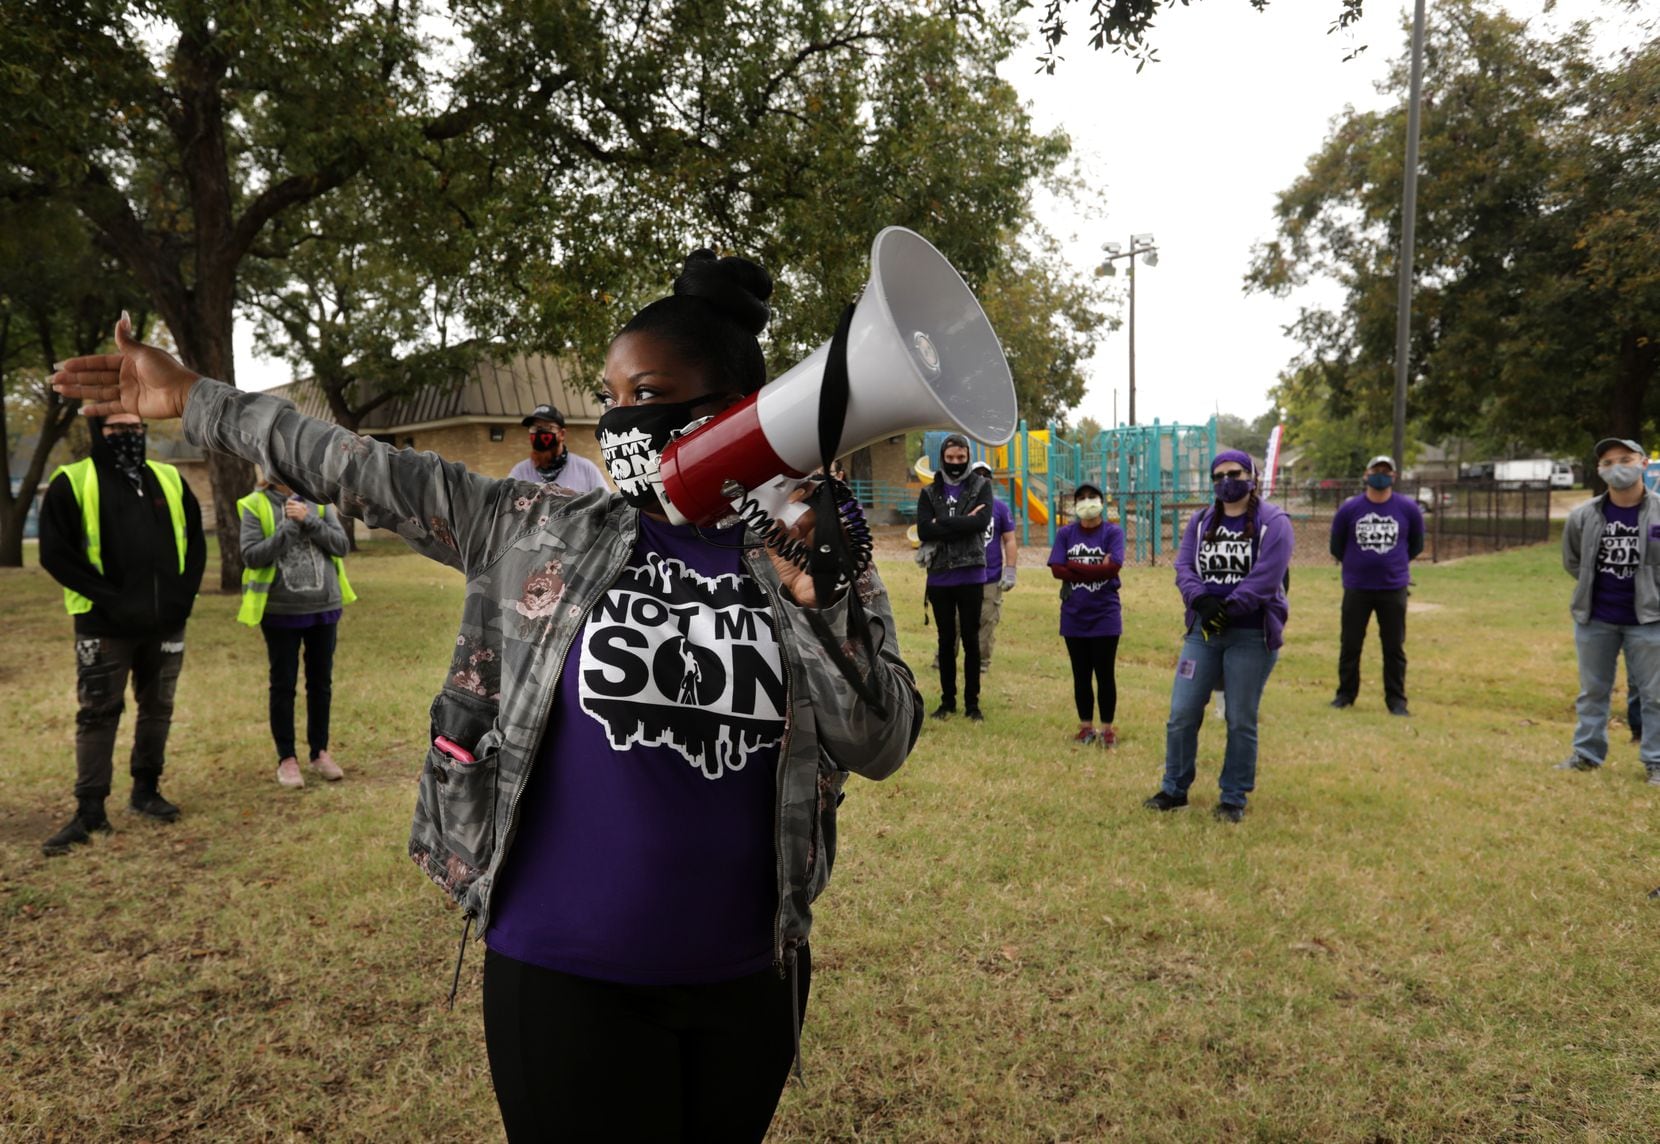 Tramonica Brown spoke to volunteers with the Not My Son nonprofit on social media before they headed out to clean up the neighborhood around the Martin Luther King Jr. Community Center in South Dallas on Oct. 25, 2020.